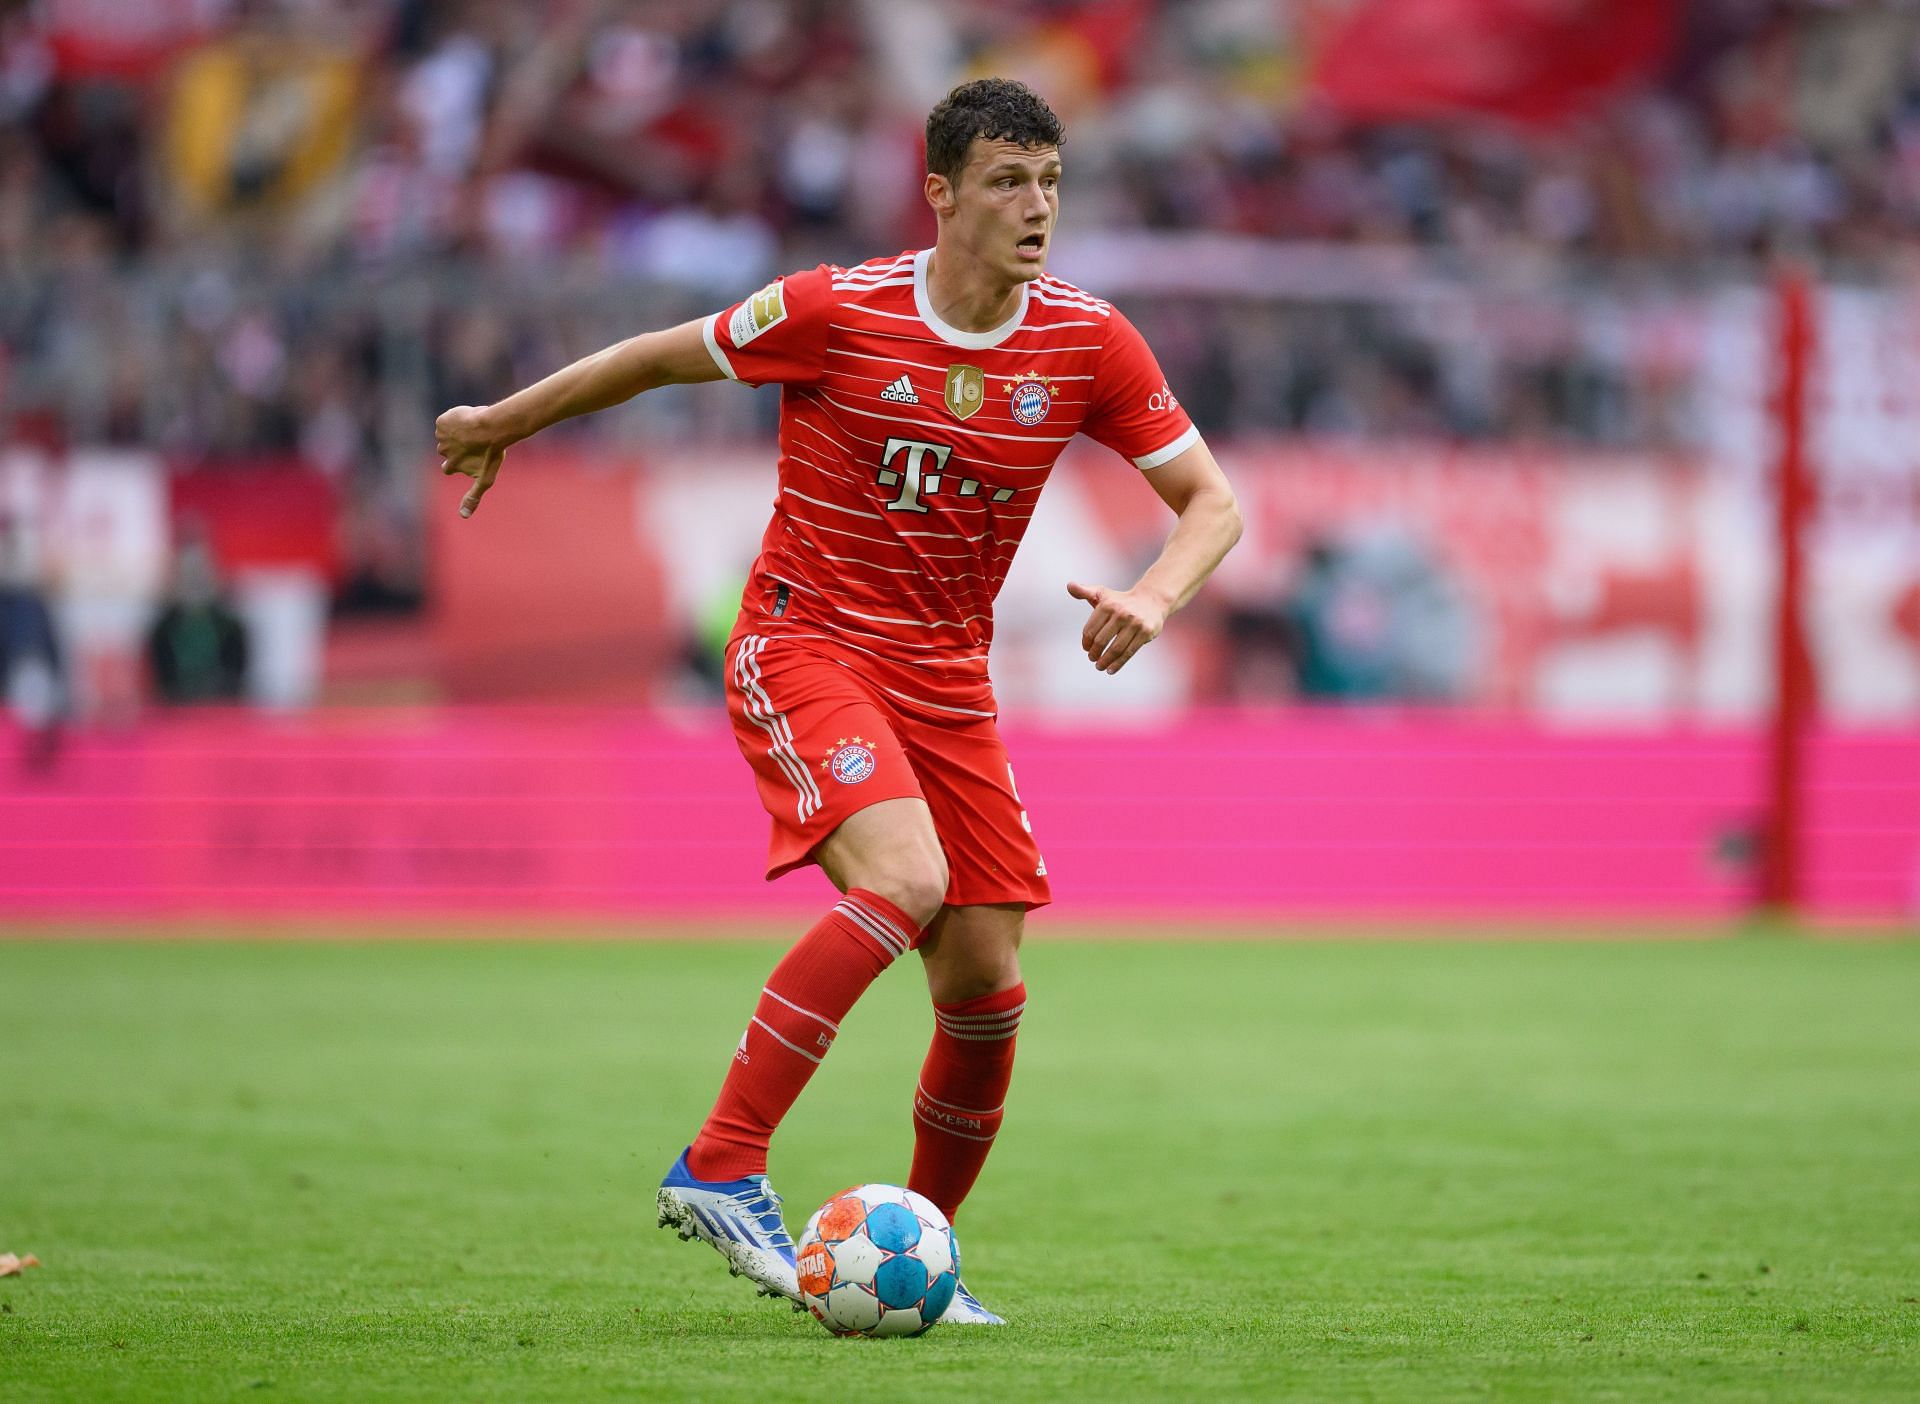 Pavard in action for Bayern Munich during a Bundesliga game last season